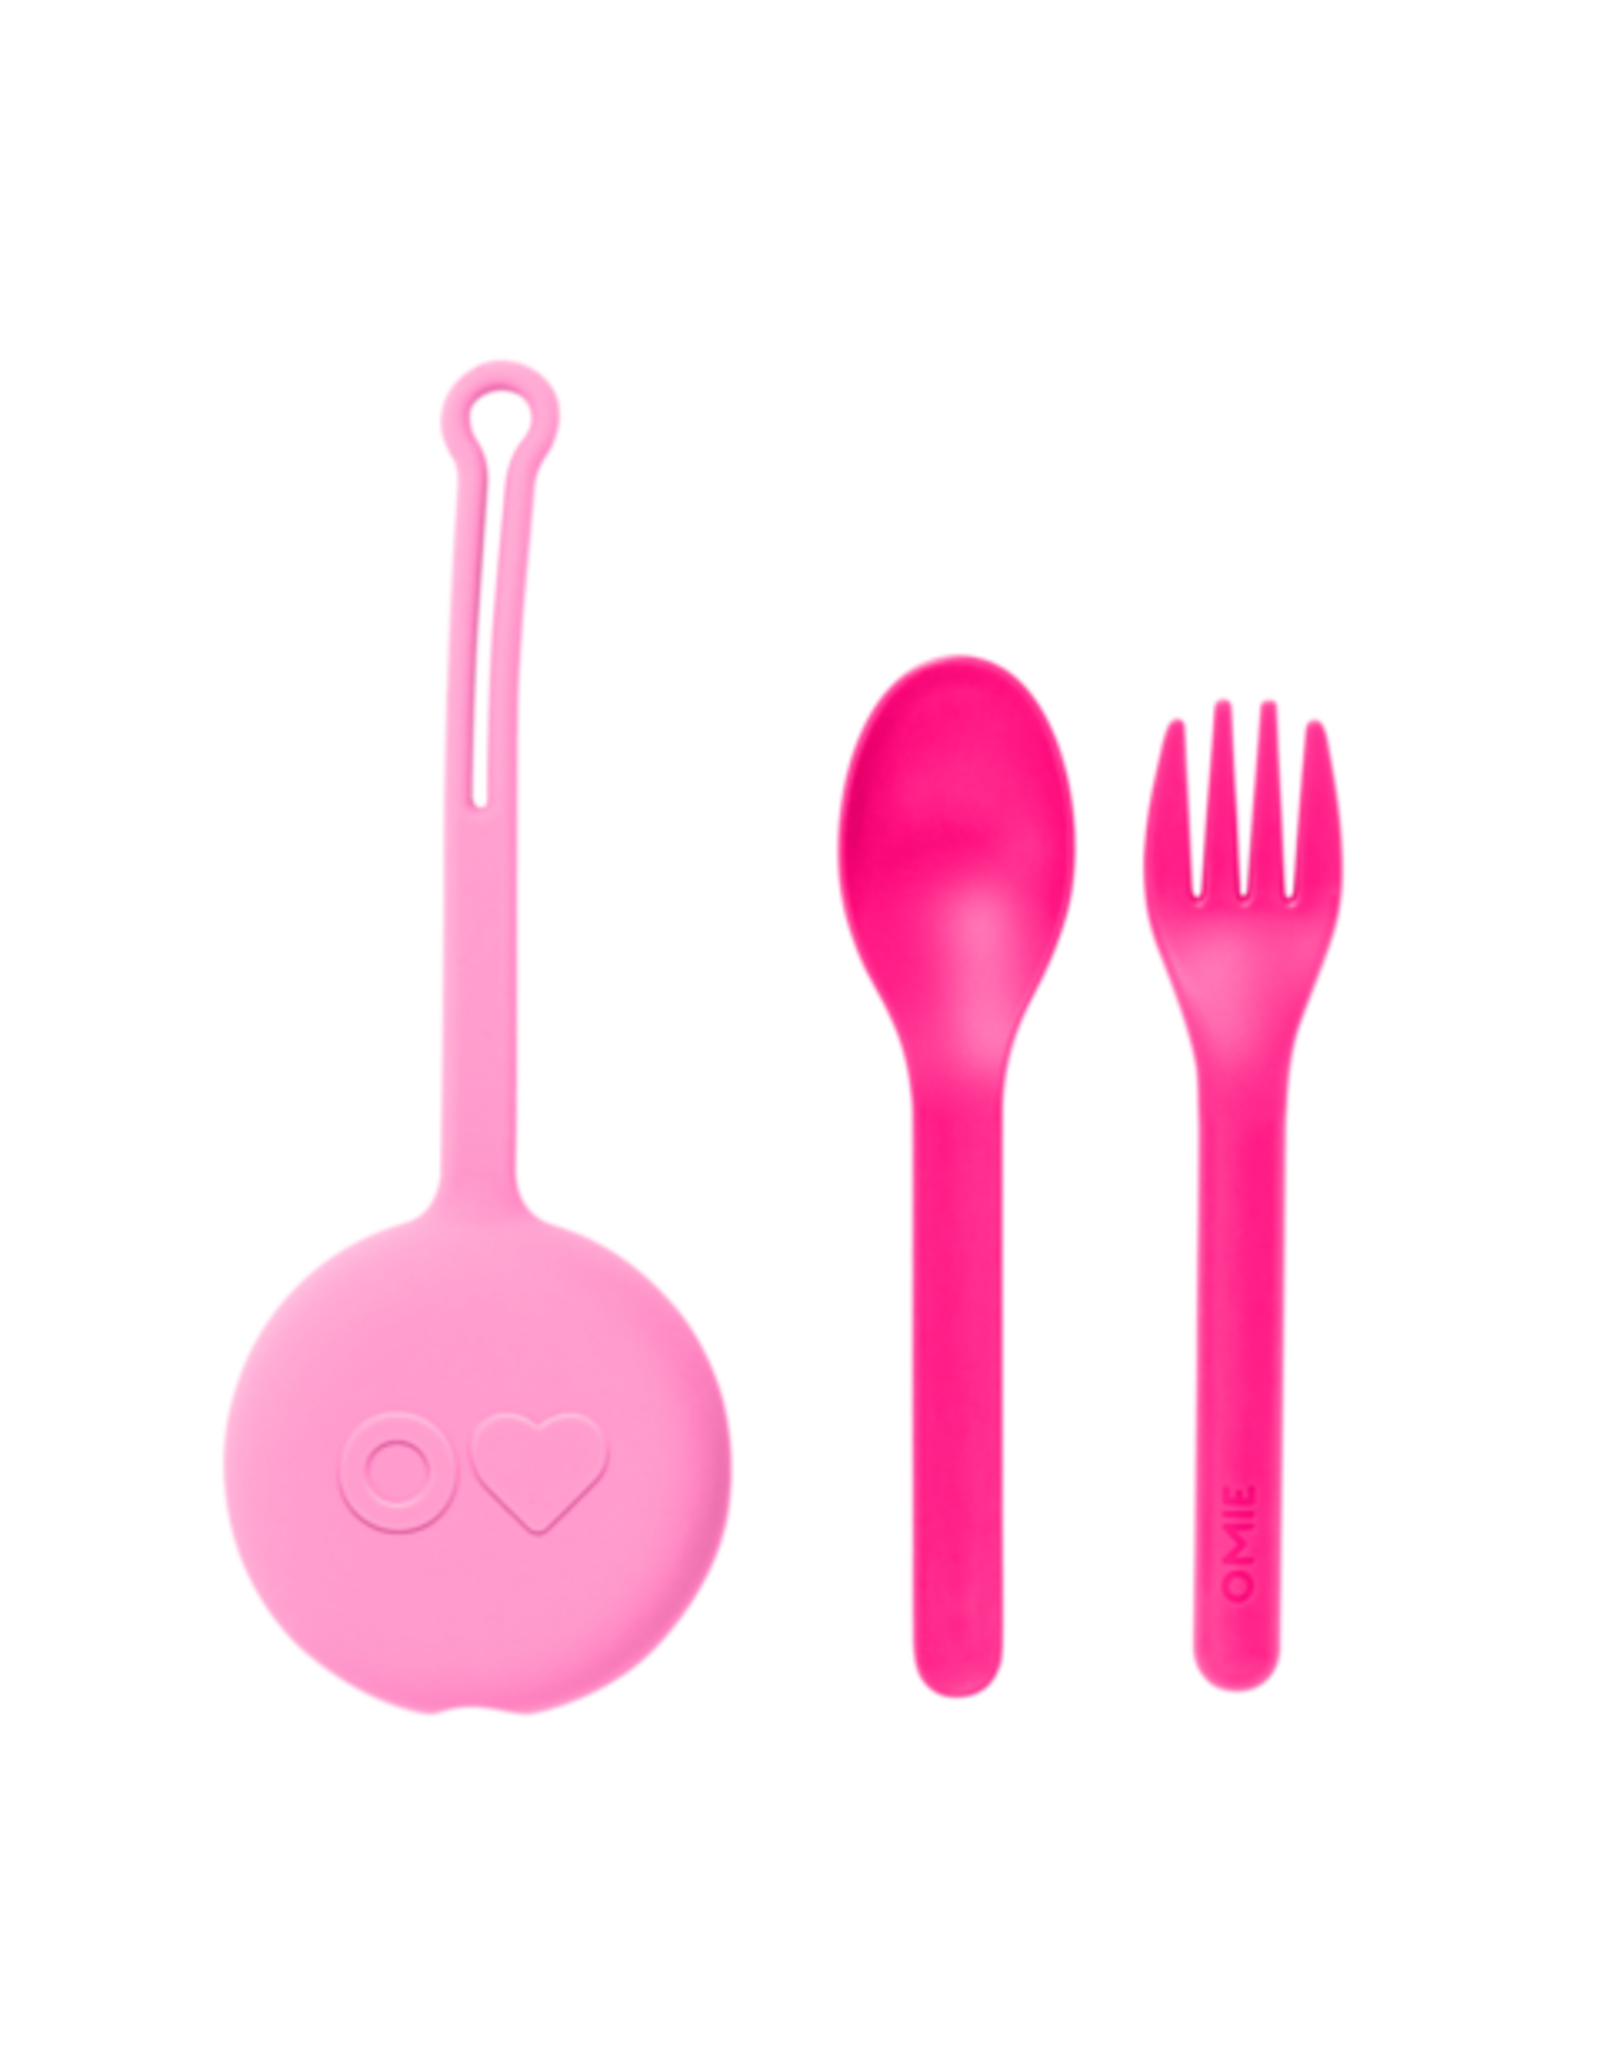 OmieLife Fork, Spoon & Pod Set, Bubble Pink